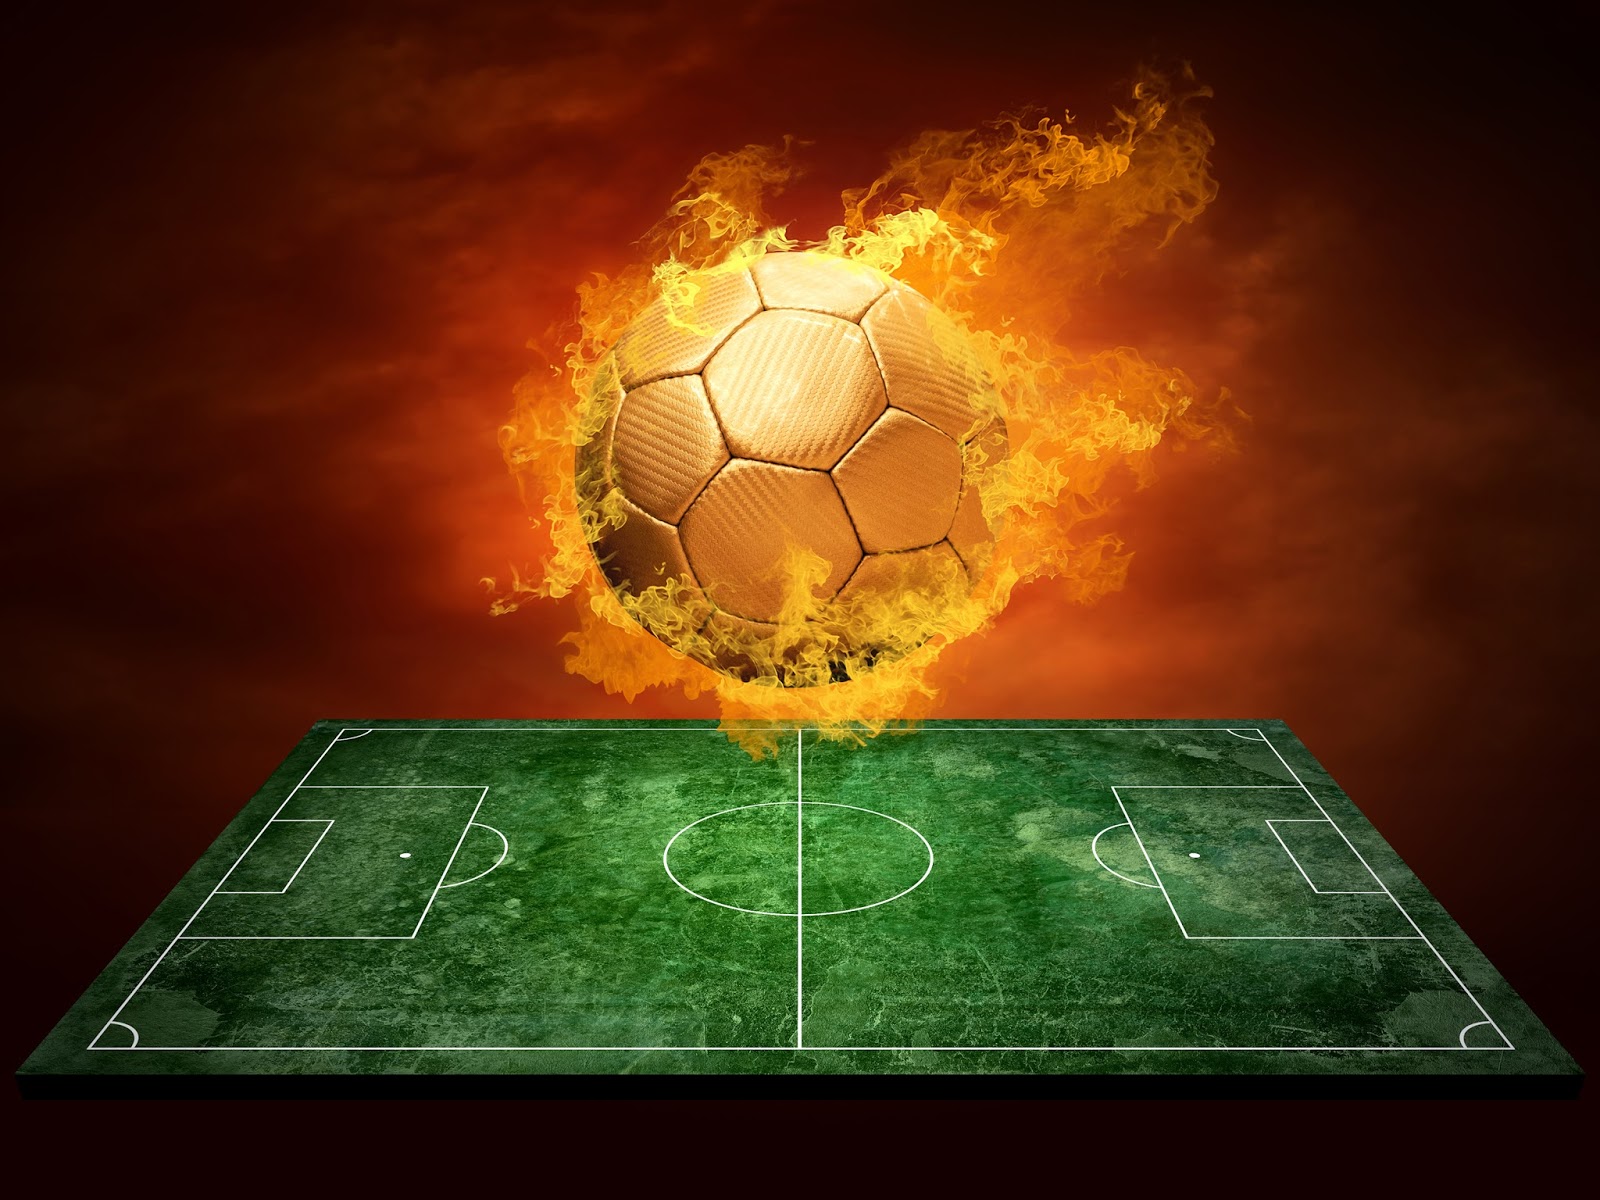 Wallpaper Pict Soccer Field Flame Posted By Muhammad